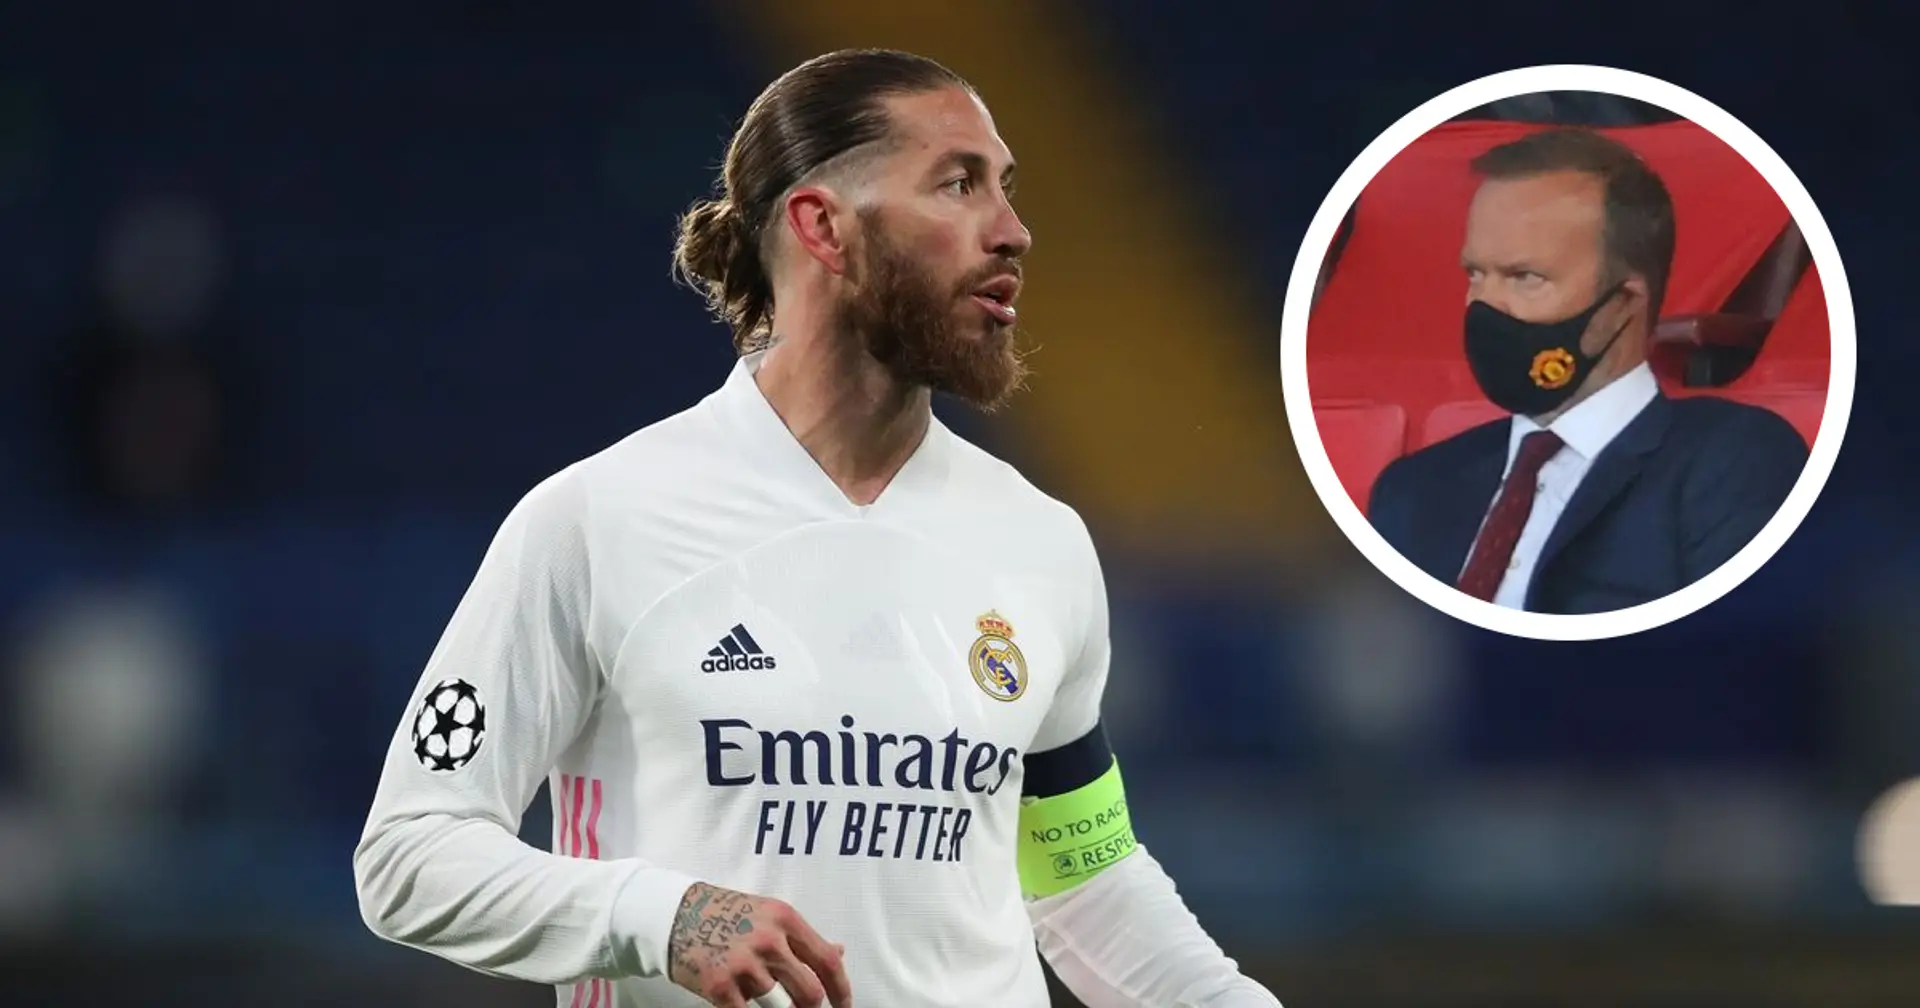 Daily Mail: Man United remain unhappy with Ramos, believe they were used by Spaniard in the past